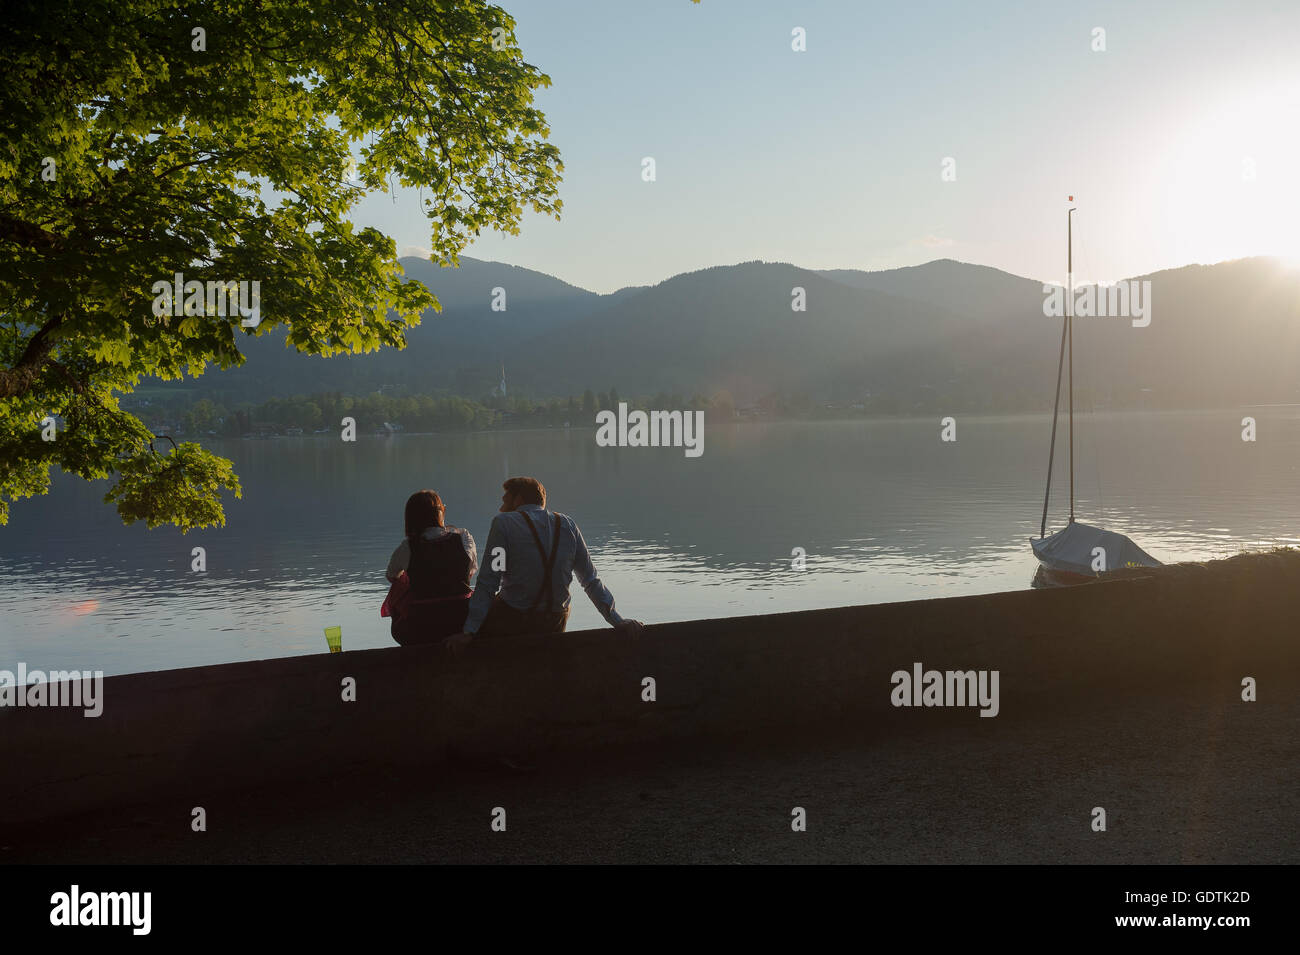 GERMANY, Bavaria, Tegernsee, May 28, 2016. A couple at the shore of the Tegernsee. Stock Photo